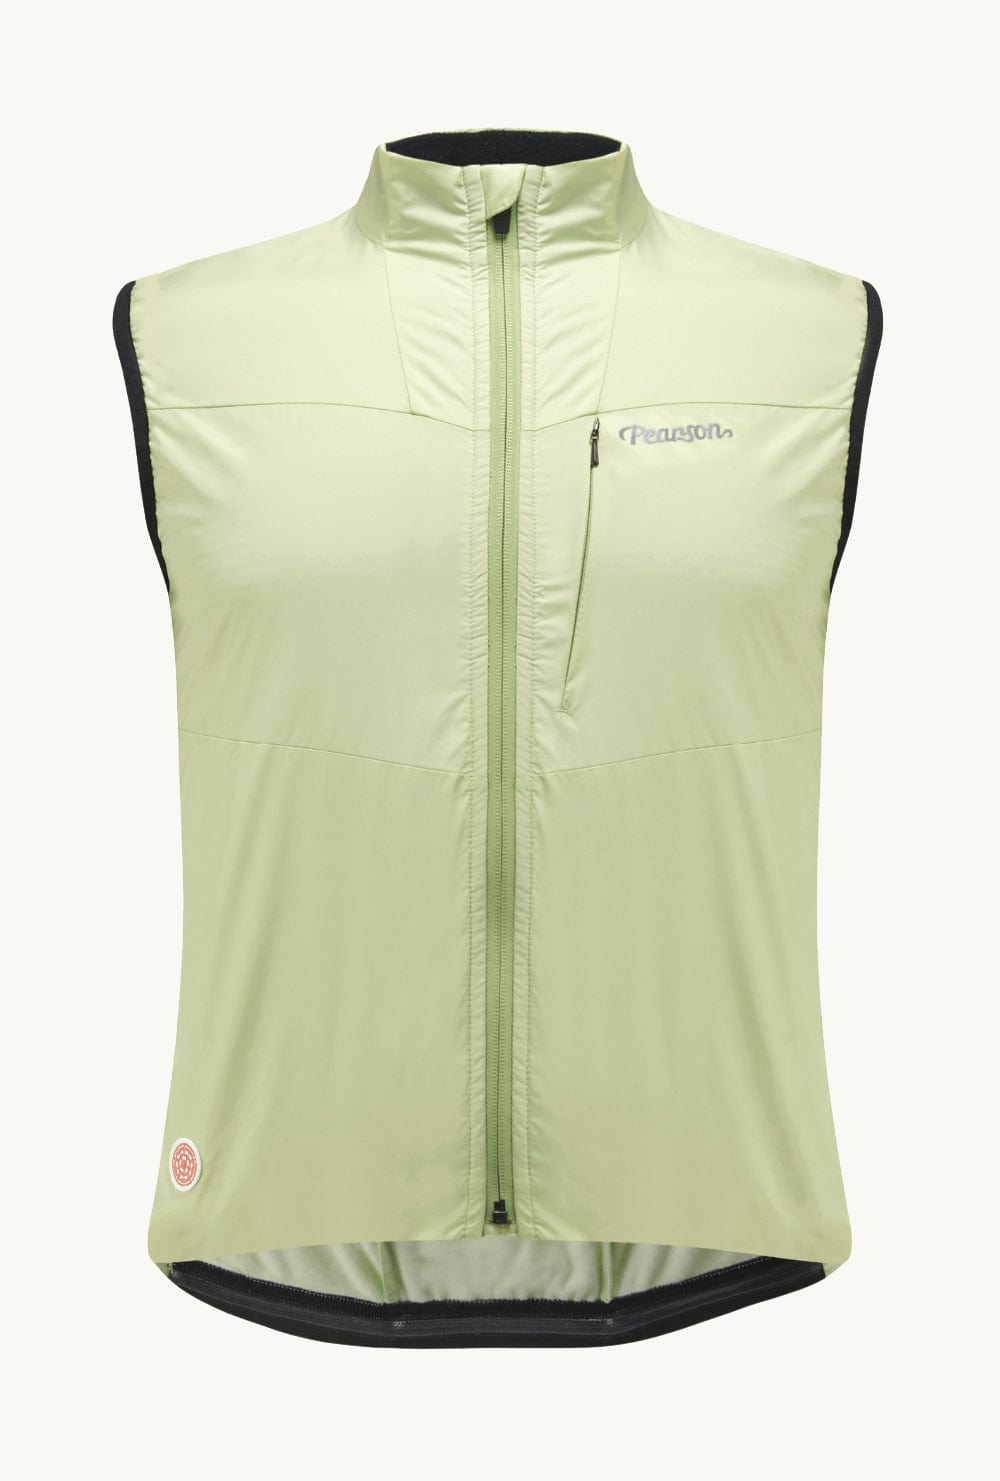 Pearson 1860  Feel The Benefits - Road Insulated Gilet Shadow Lime  Small / Shadow Lime